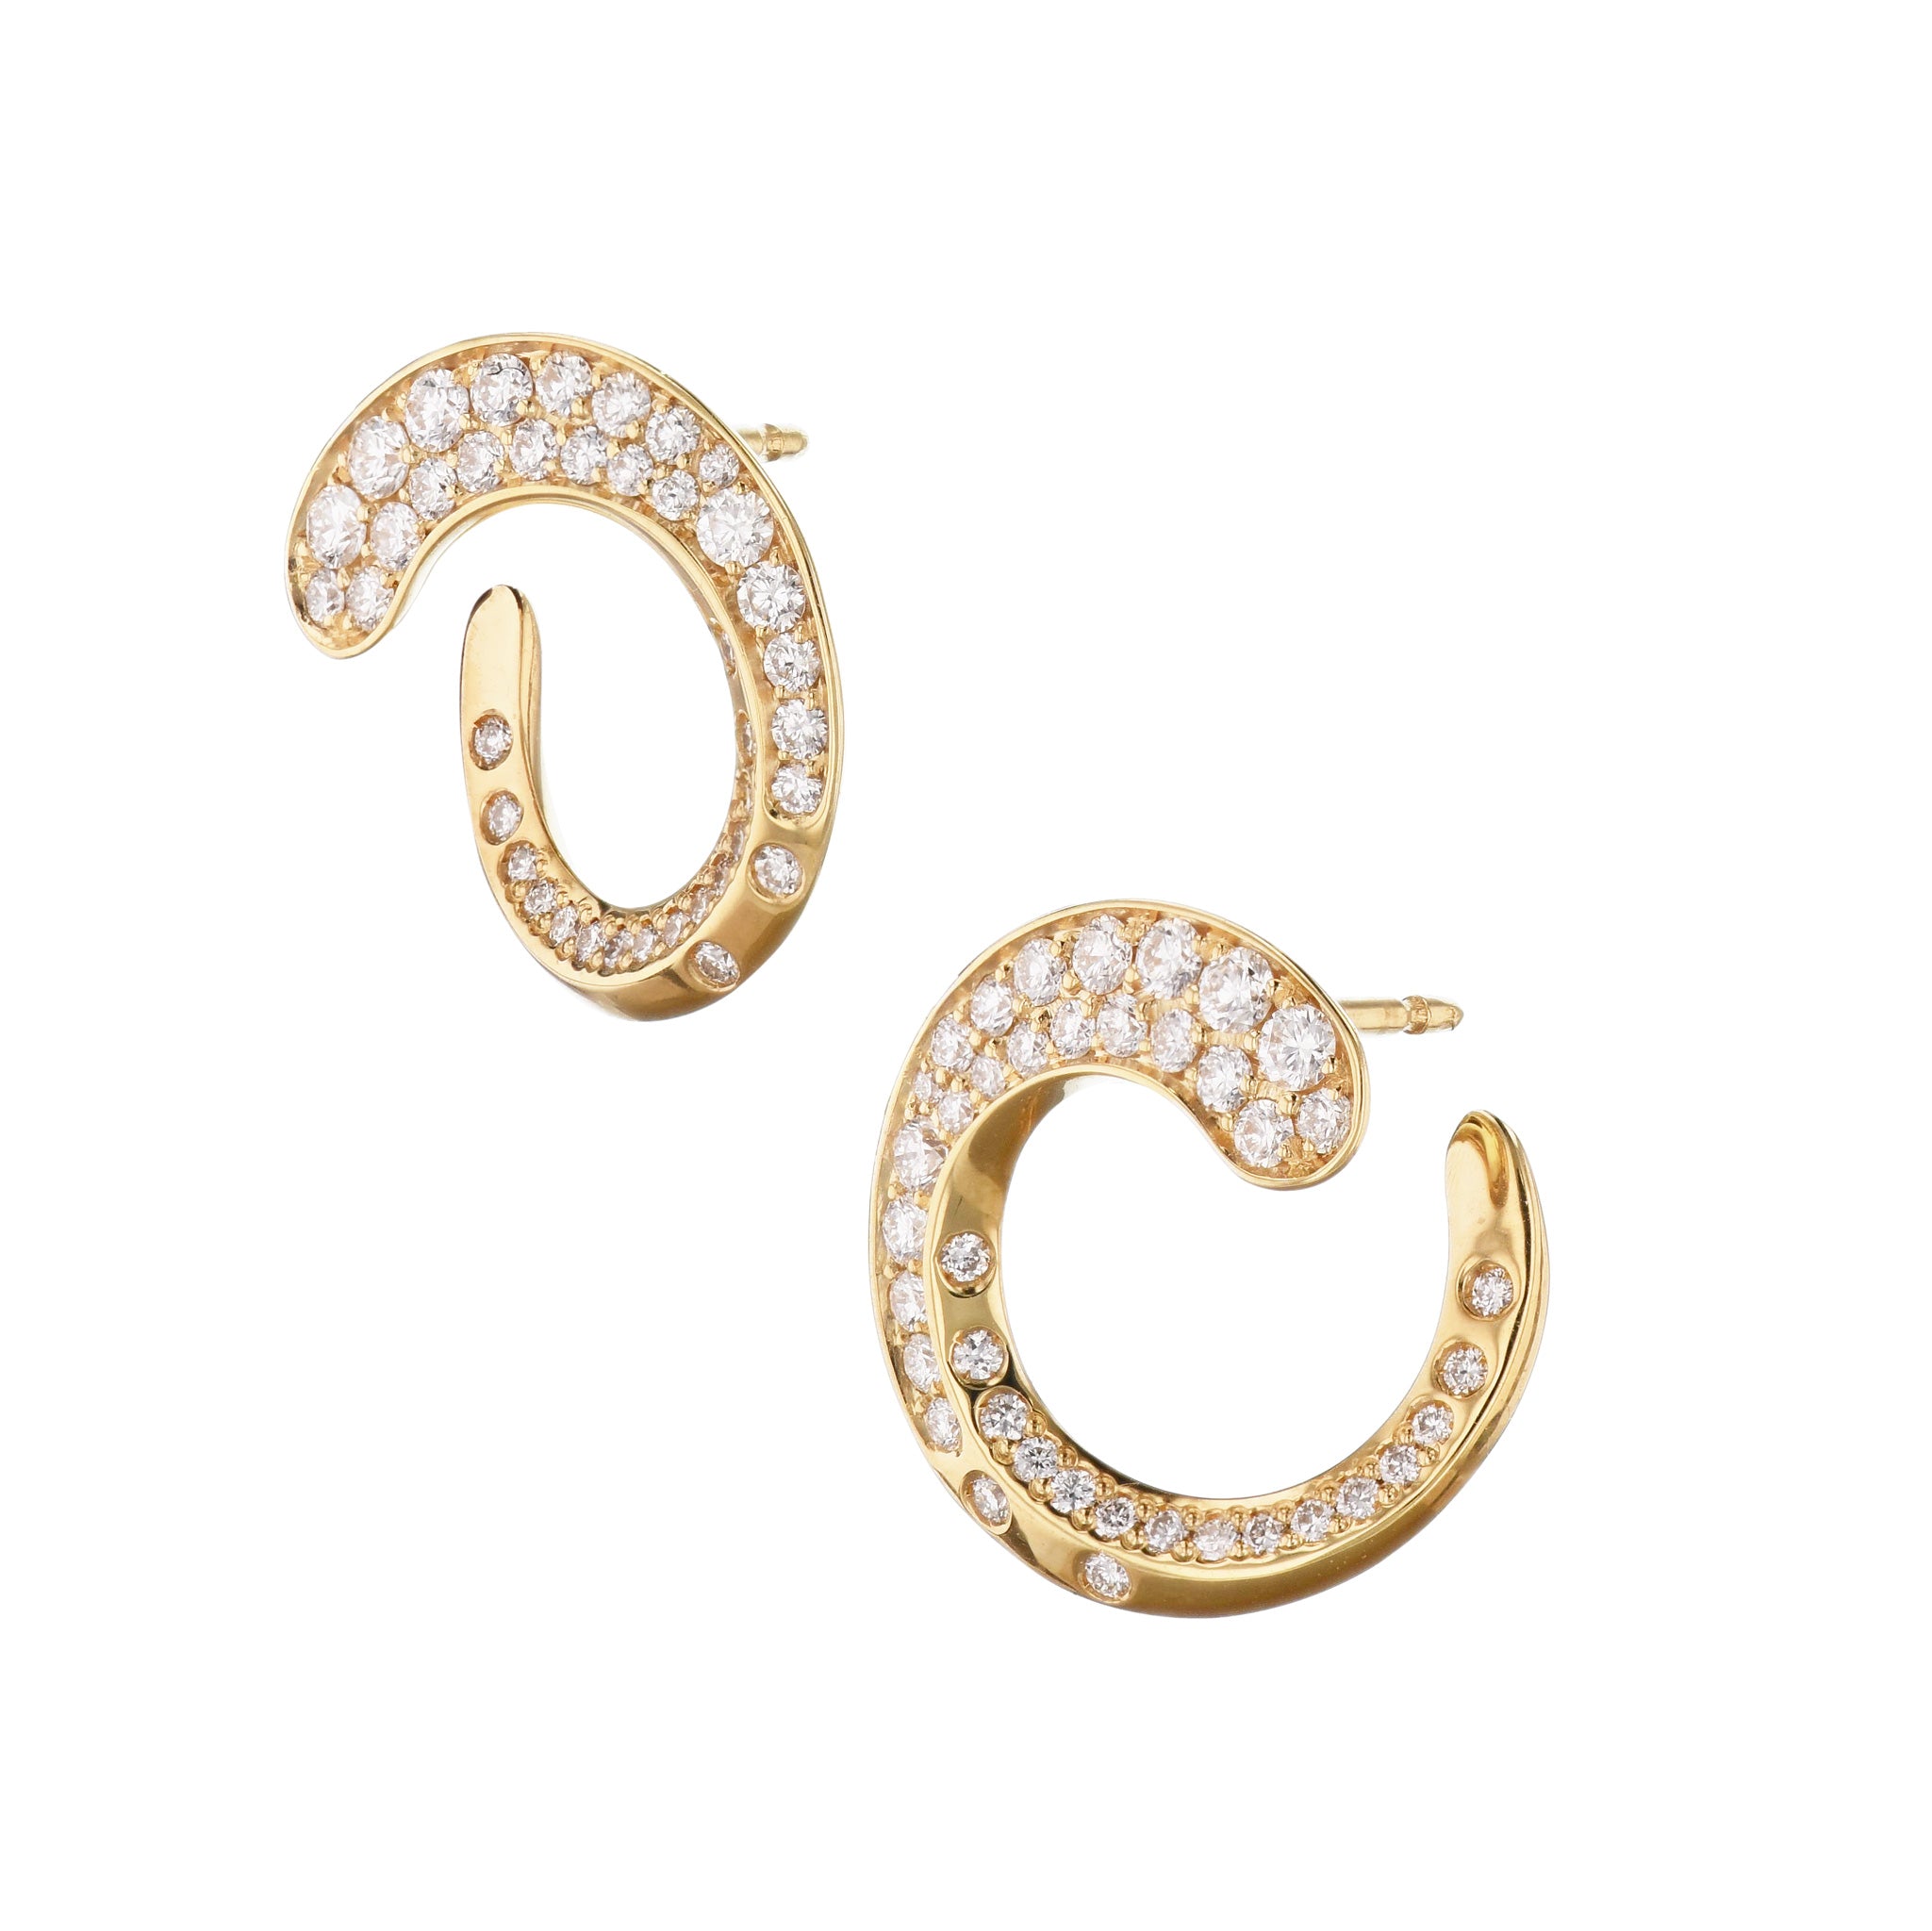 Diamond Yellow Gold Earrings Earrings Curated by H